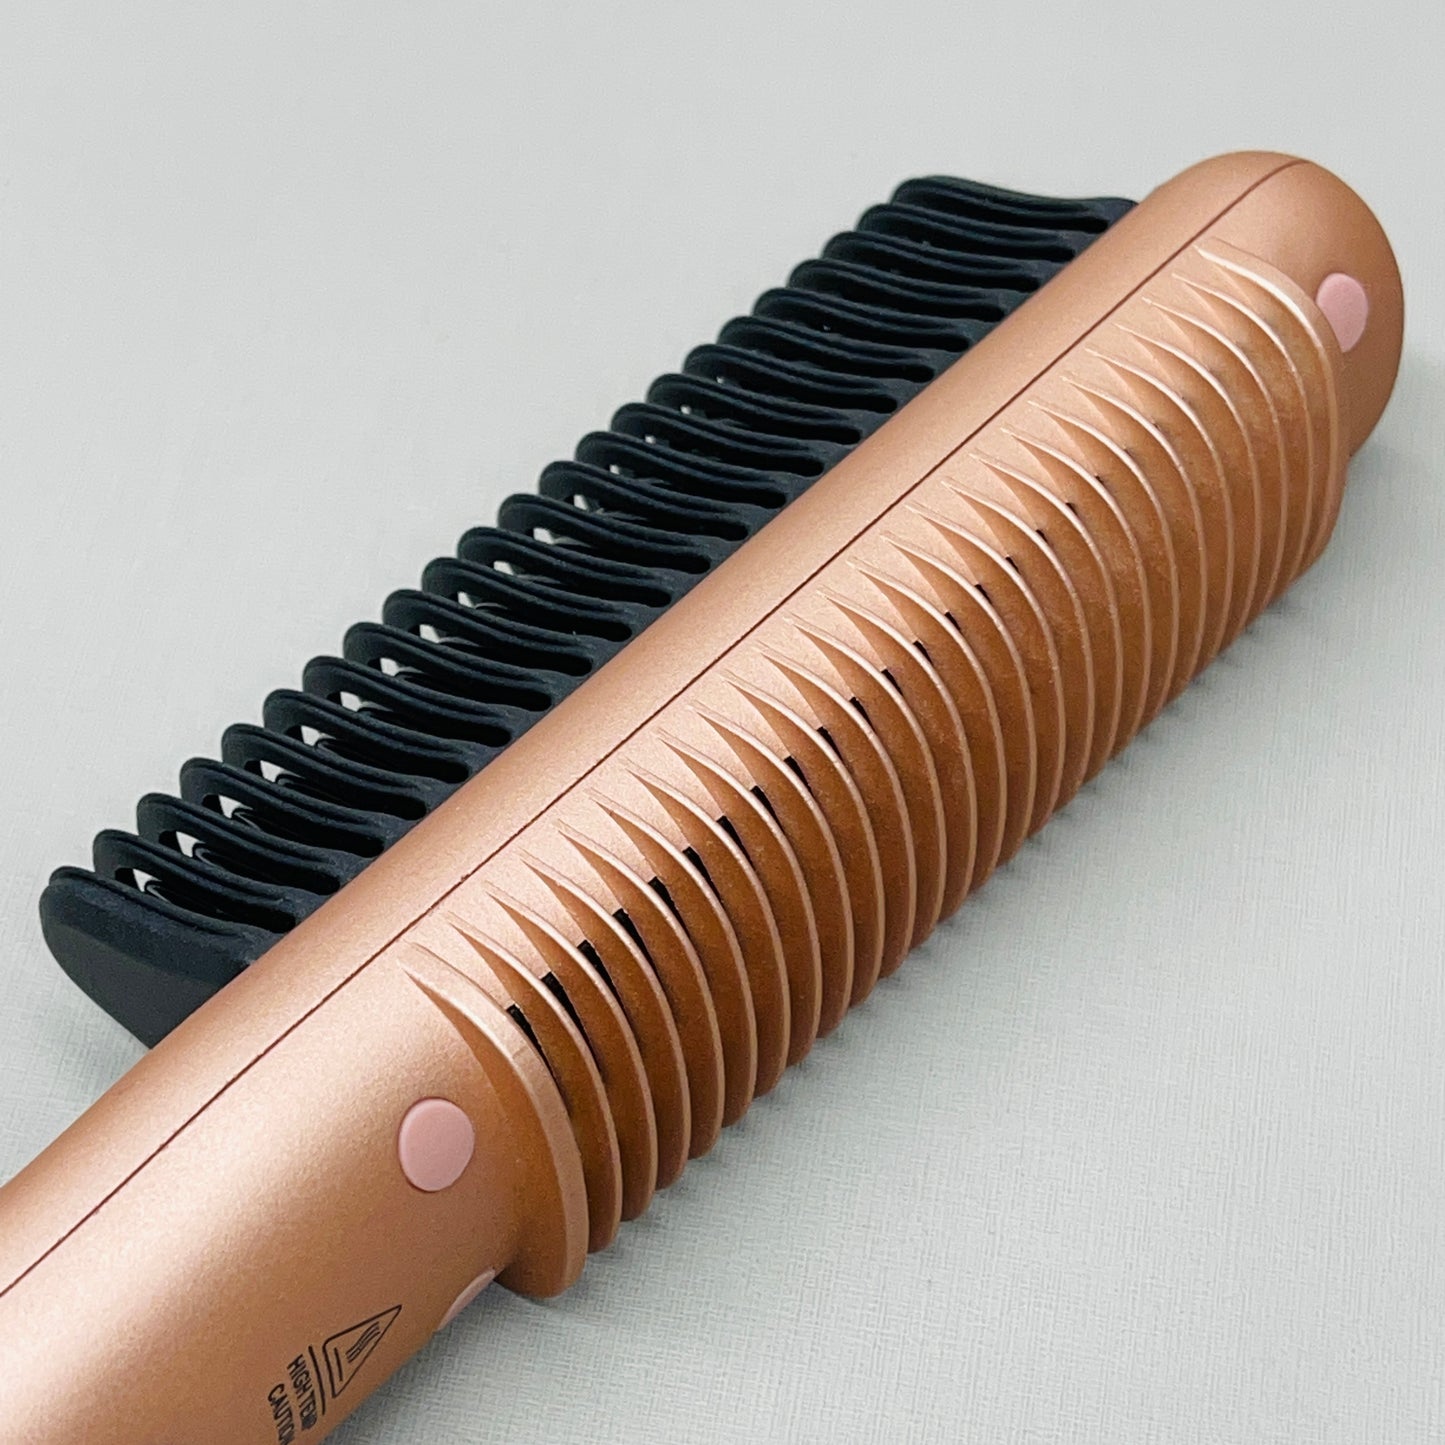 SOLEIL Styling Comb Ionic Flexible Guard 450° Rose Gold L40HBS-M39 MSRP $375 (New)